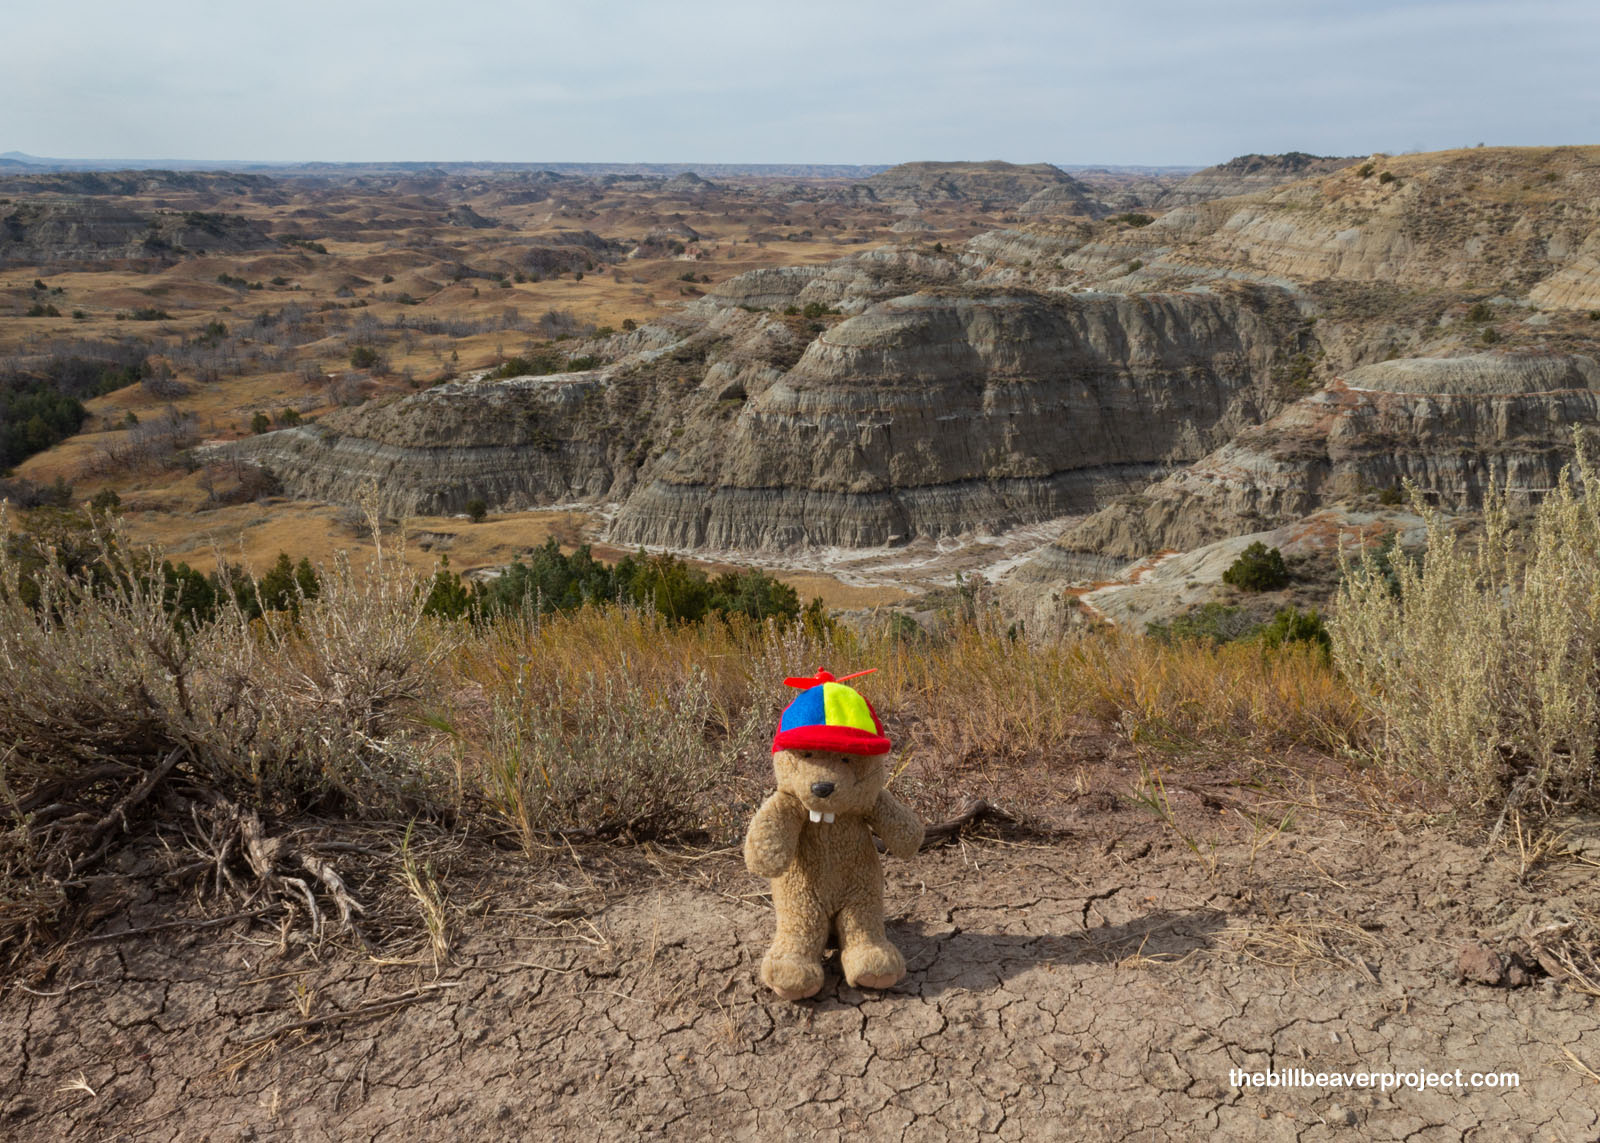 The badlands from the Boicourt Overlook!